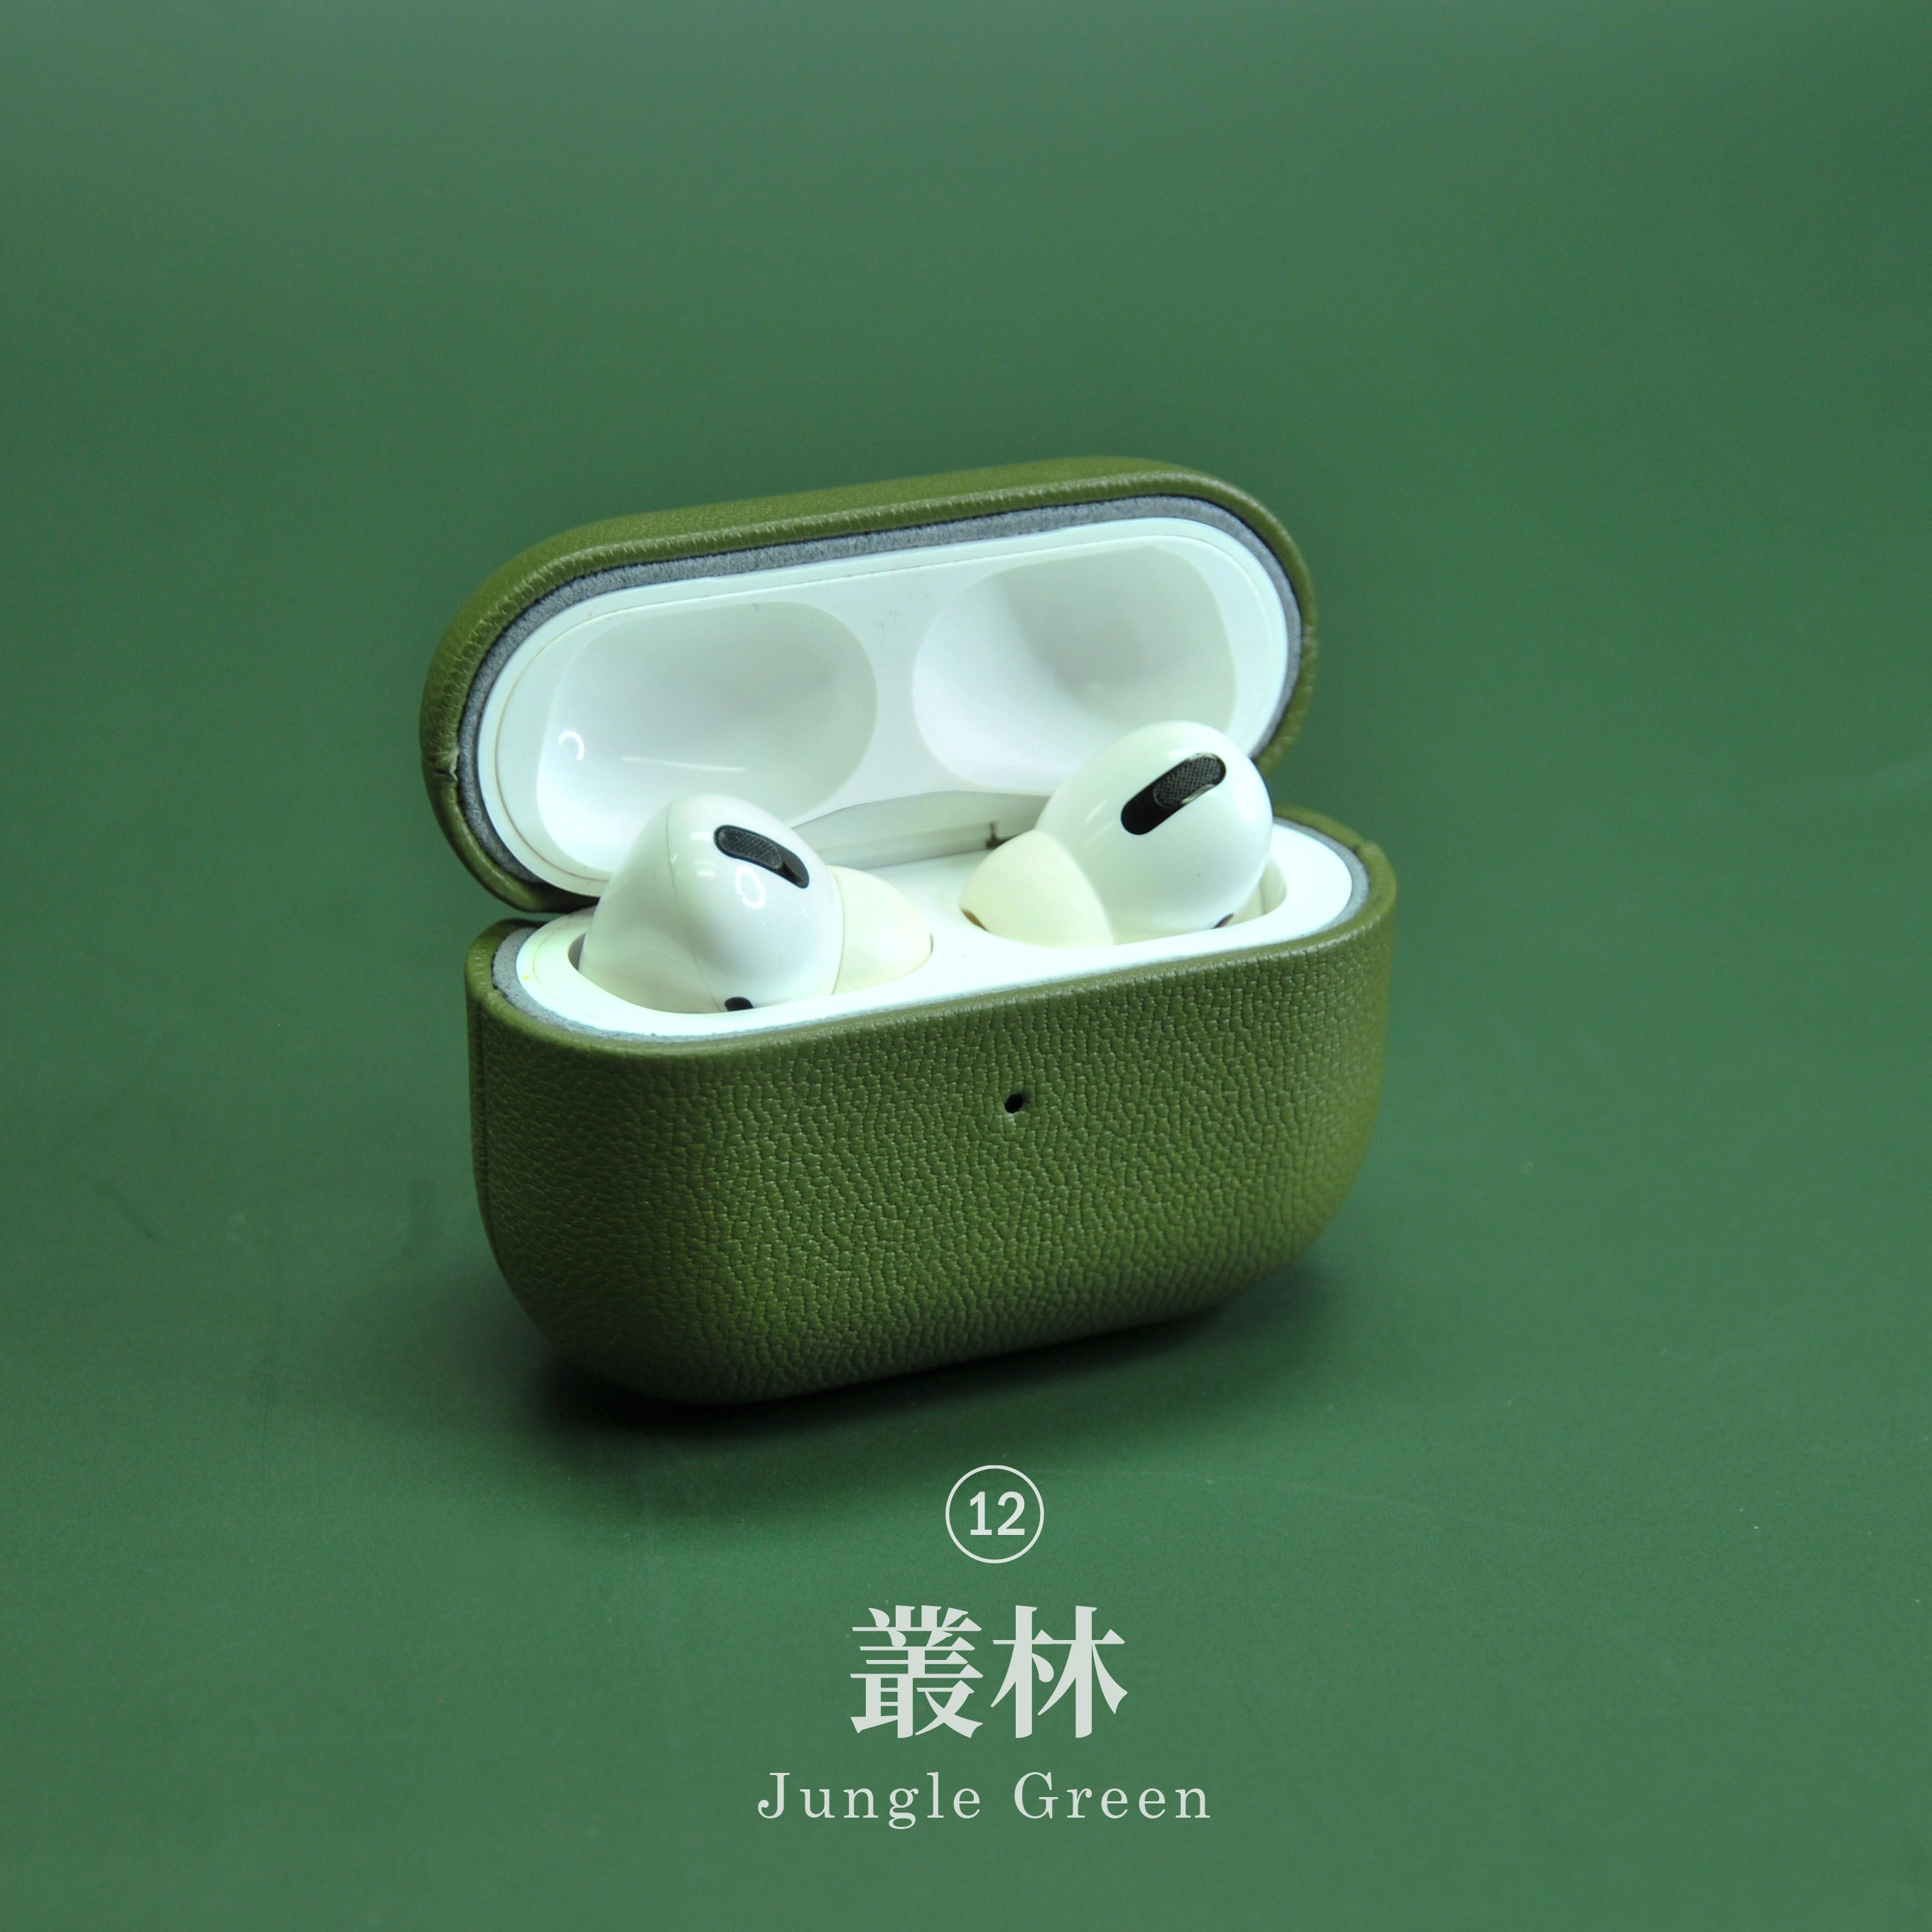 Genuine Leather AirPods Pro Case - Green Series